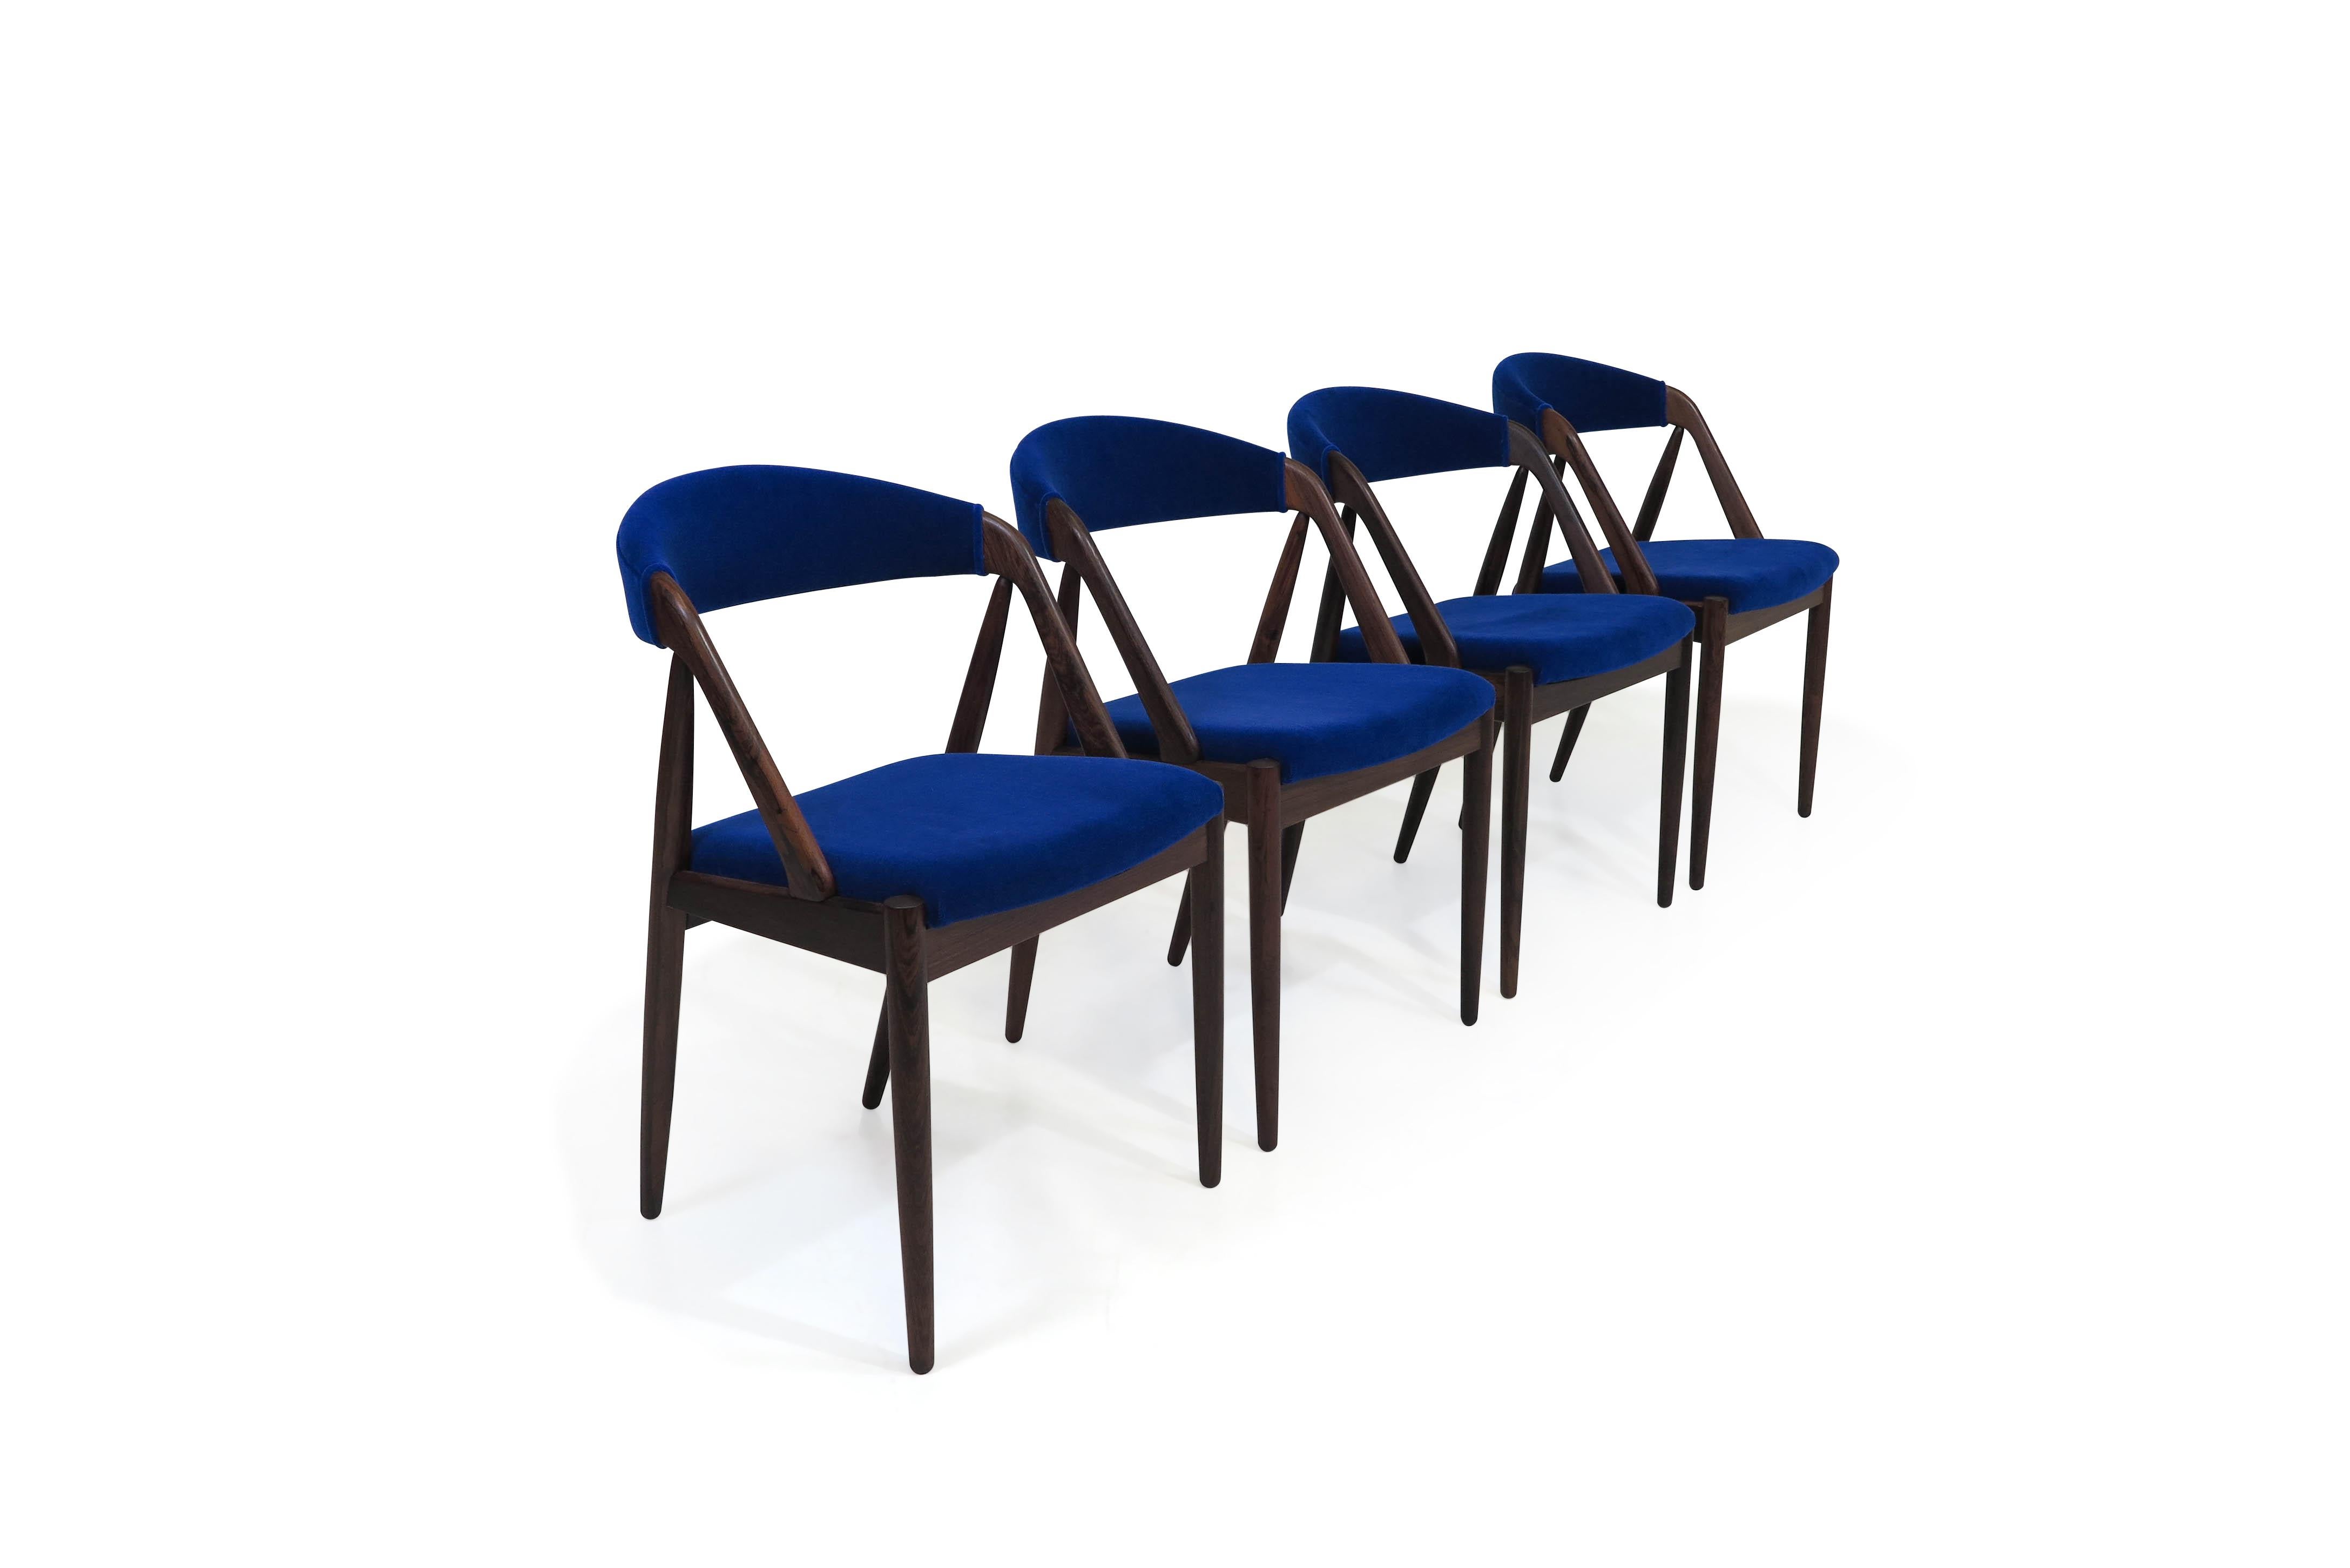 20th Century Kai Chairs Rosewood Dining Chairs in Cobalt Royal Blue Mohair